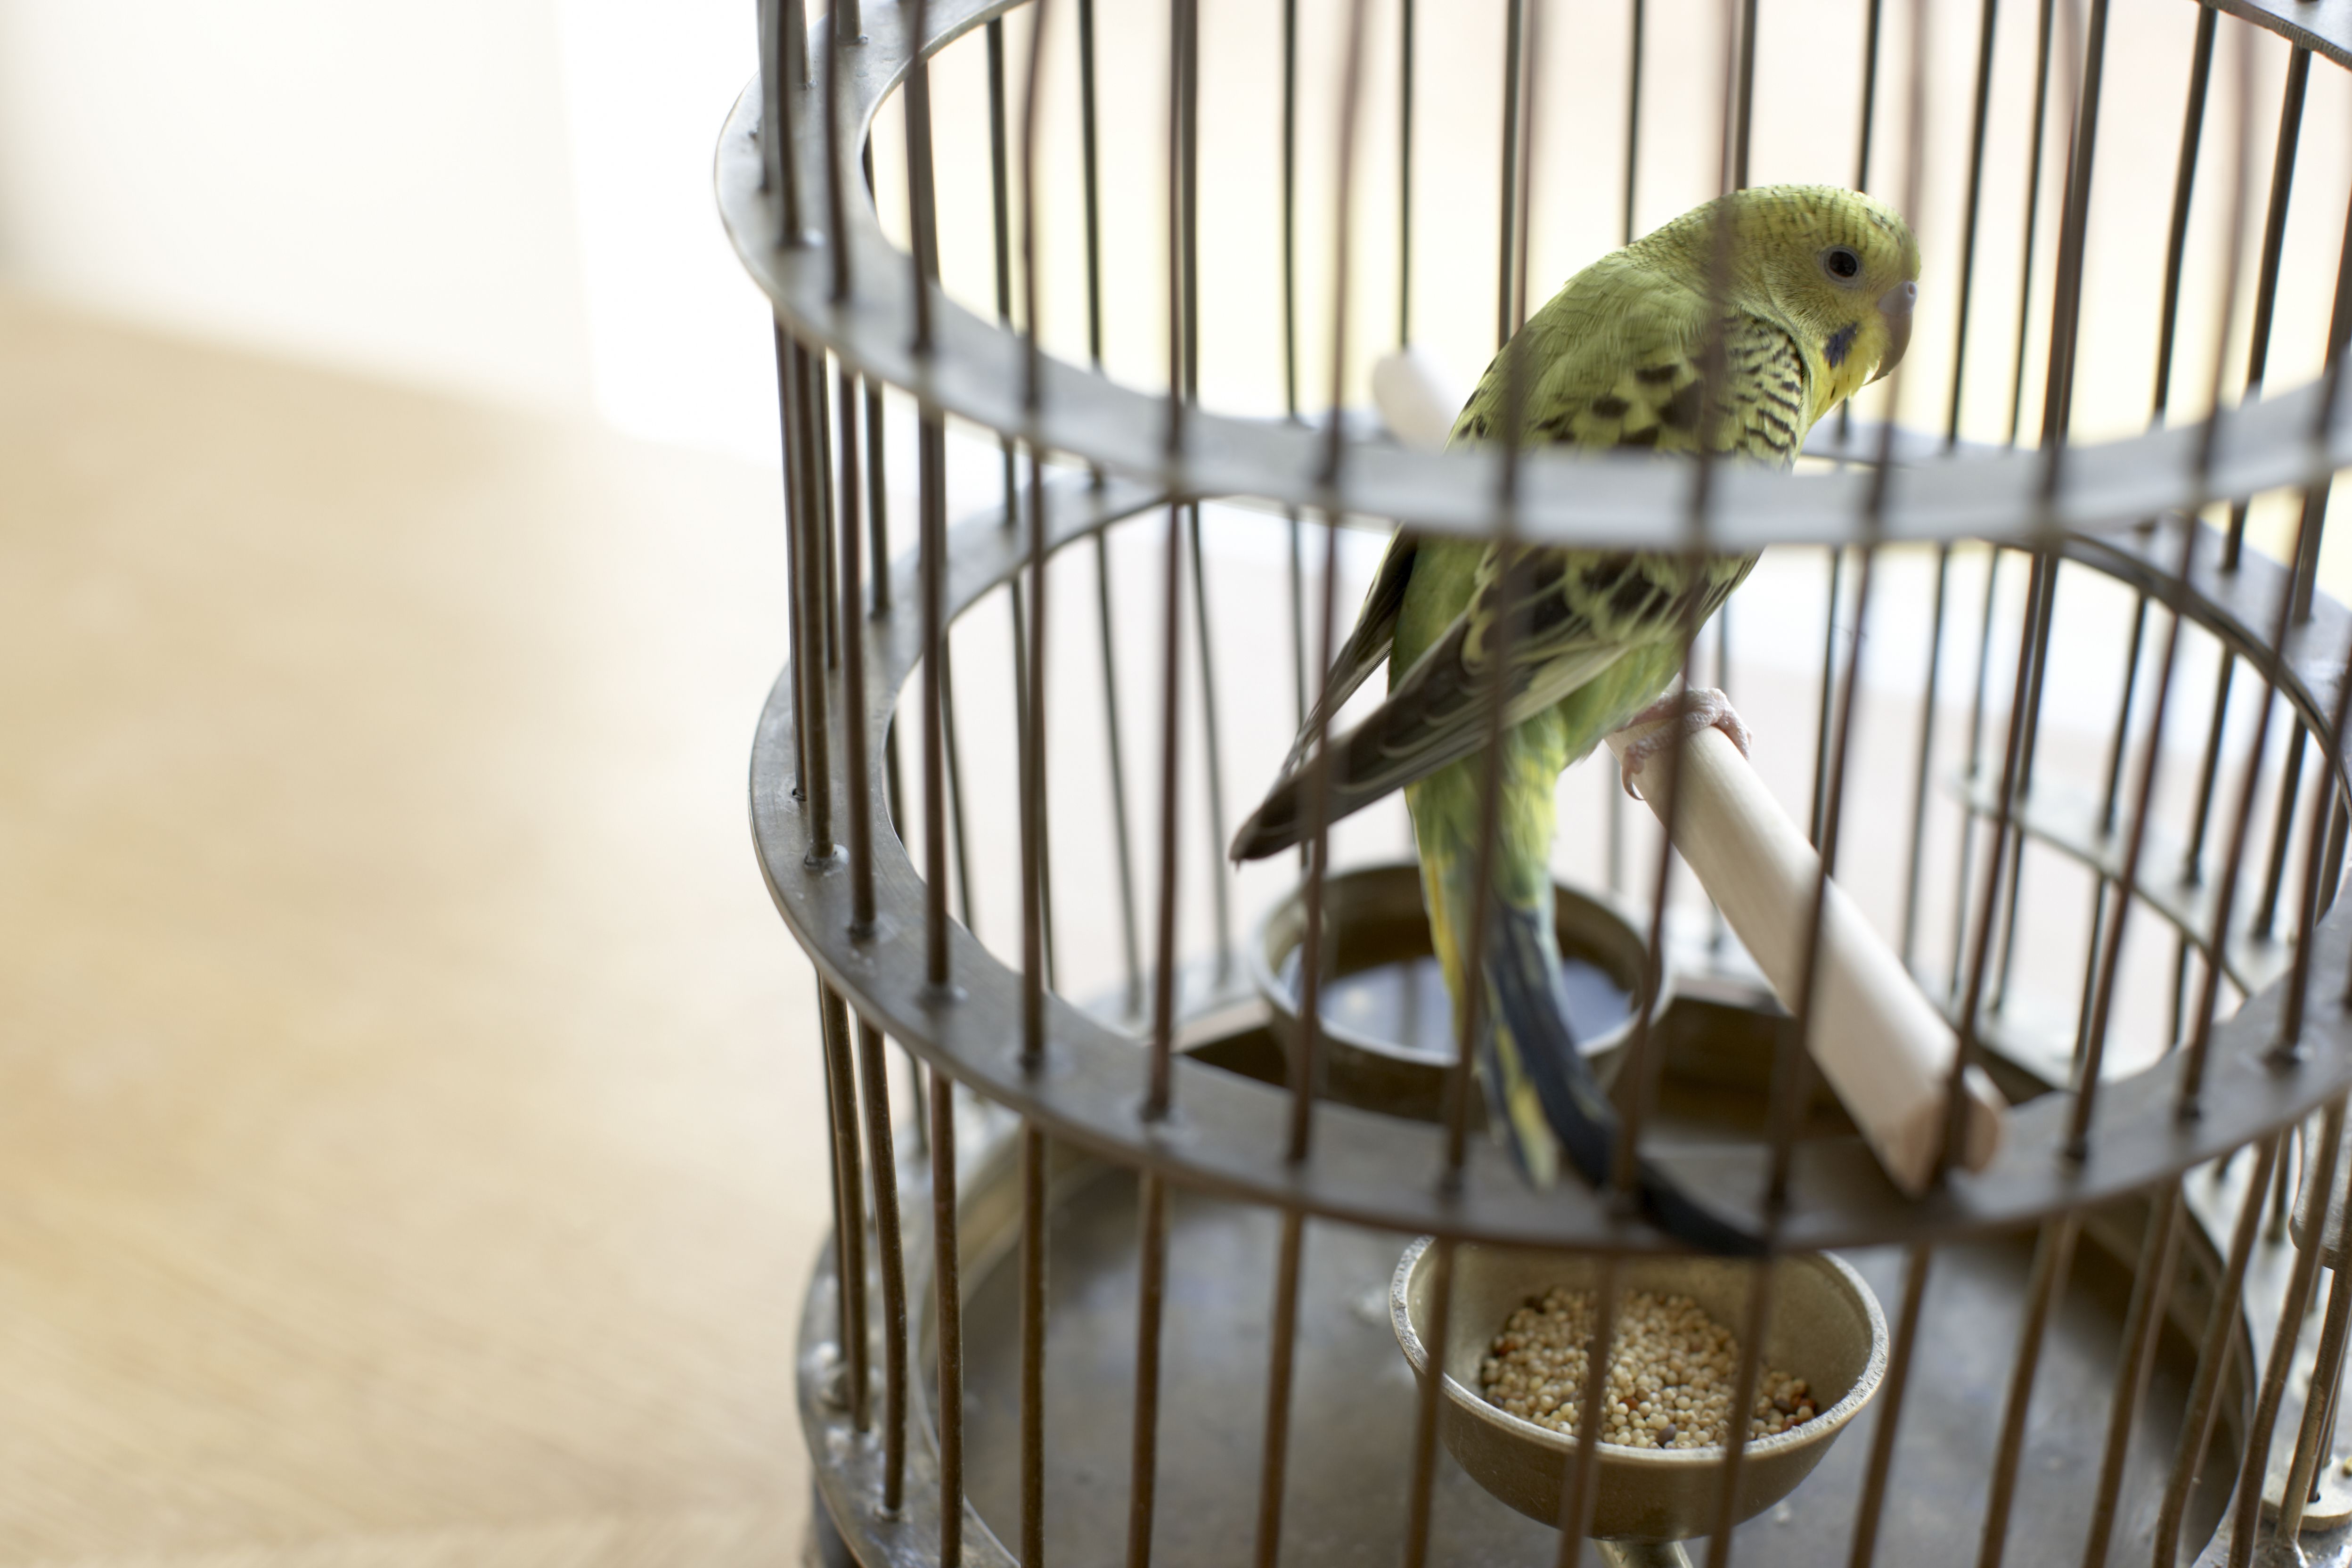 Budgie in a cage